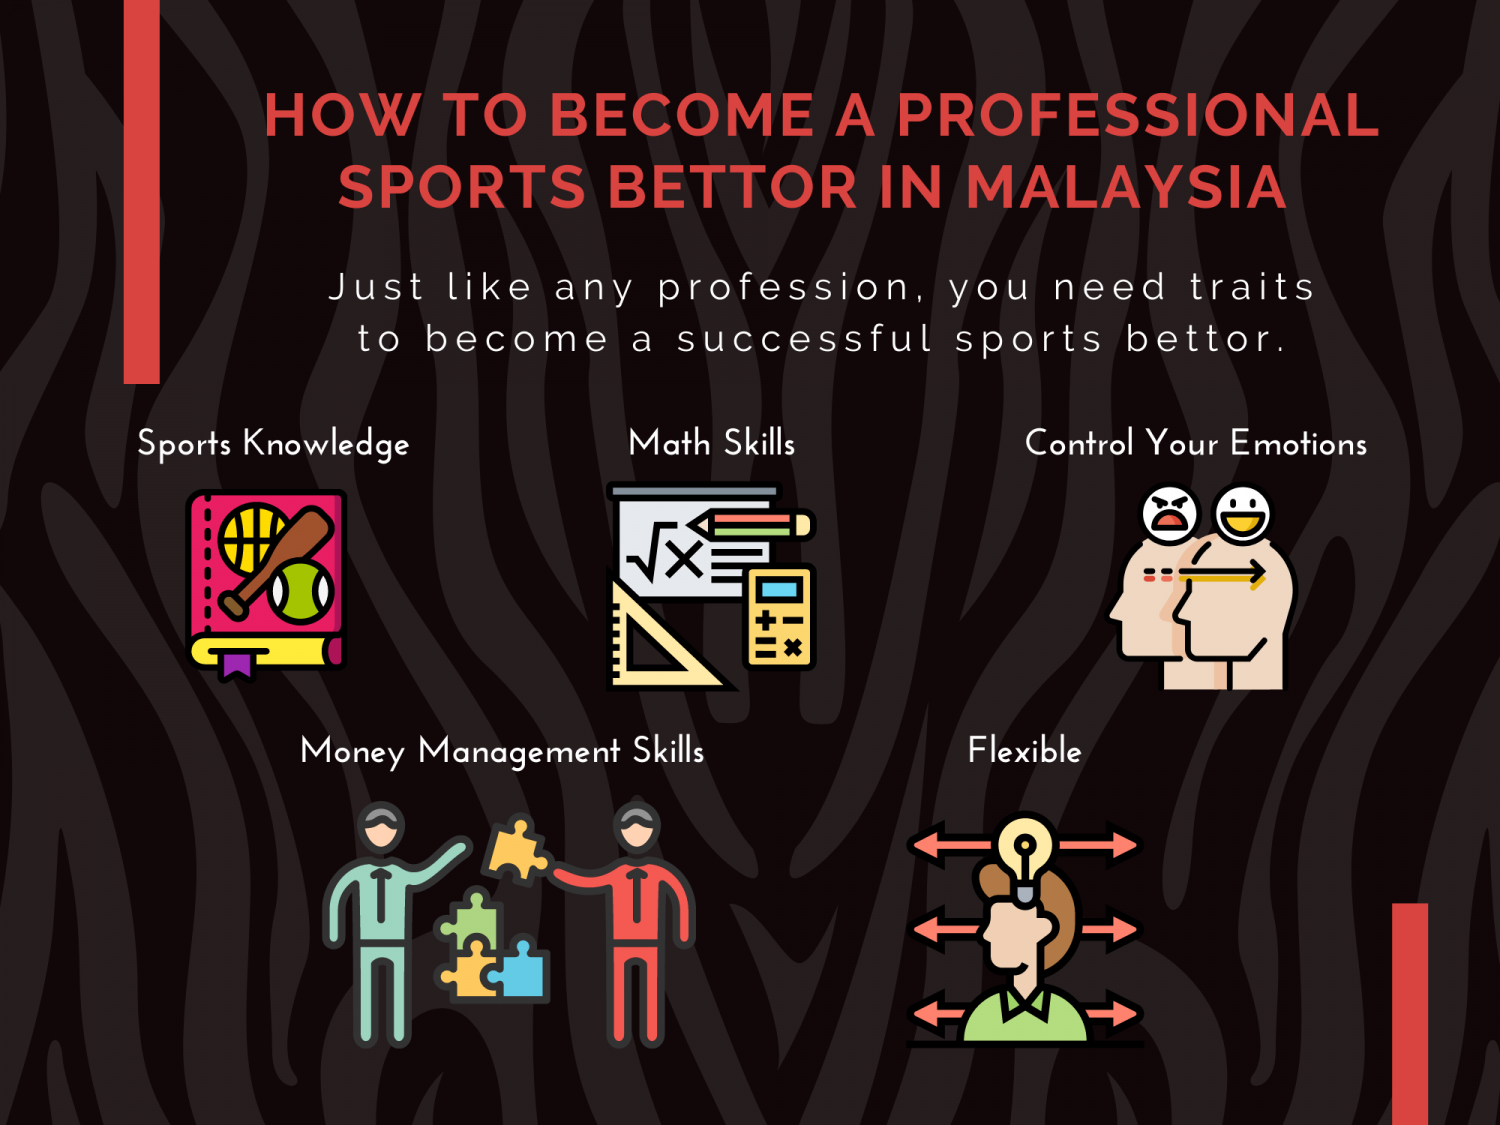 How to Become a Professional Sports Bettor in Malaysia  Infographic